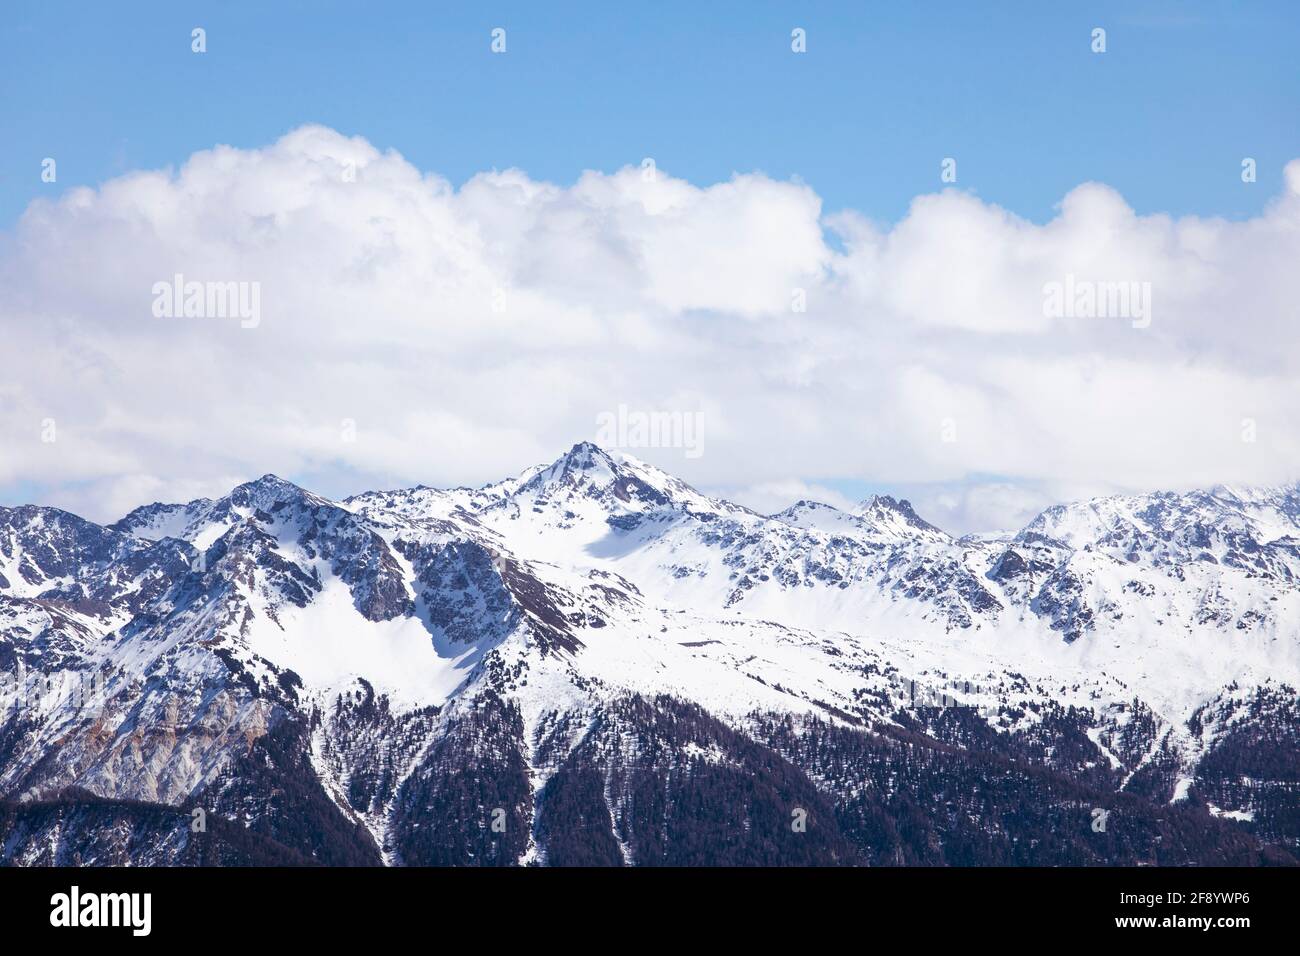 Winter landscape, snowcapped mountains with cloudscape, blue sky. Snowy mountain peaks in Swiss alps, Wallis. Stock Photo